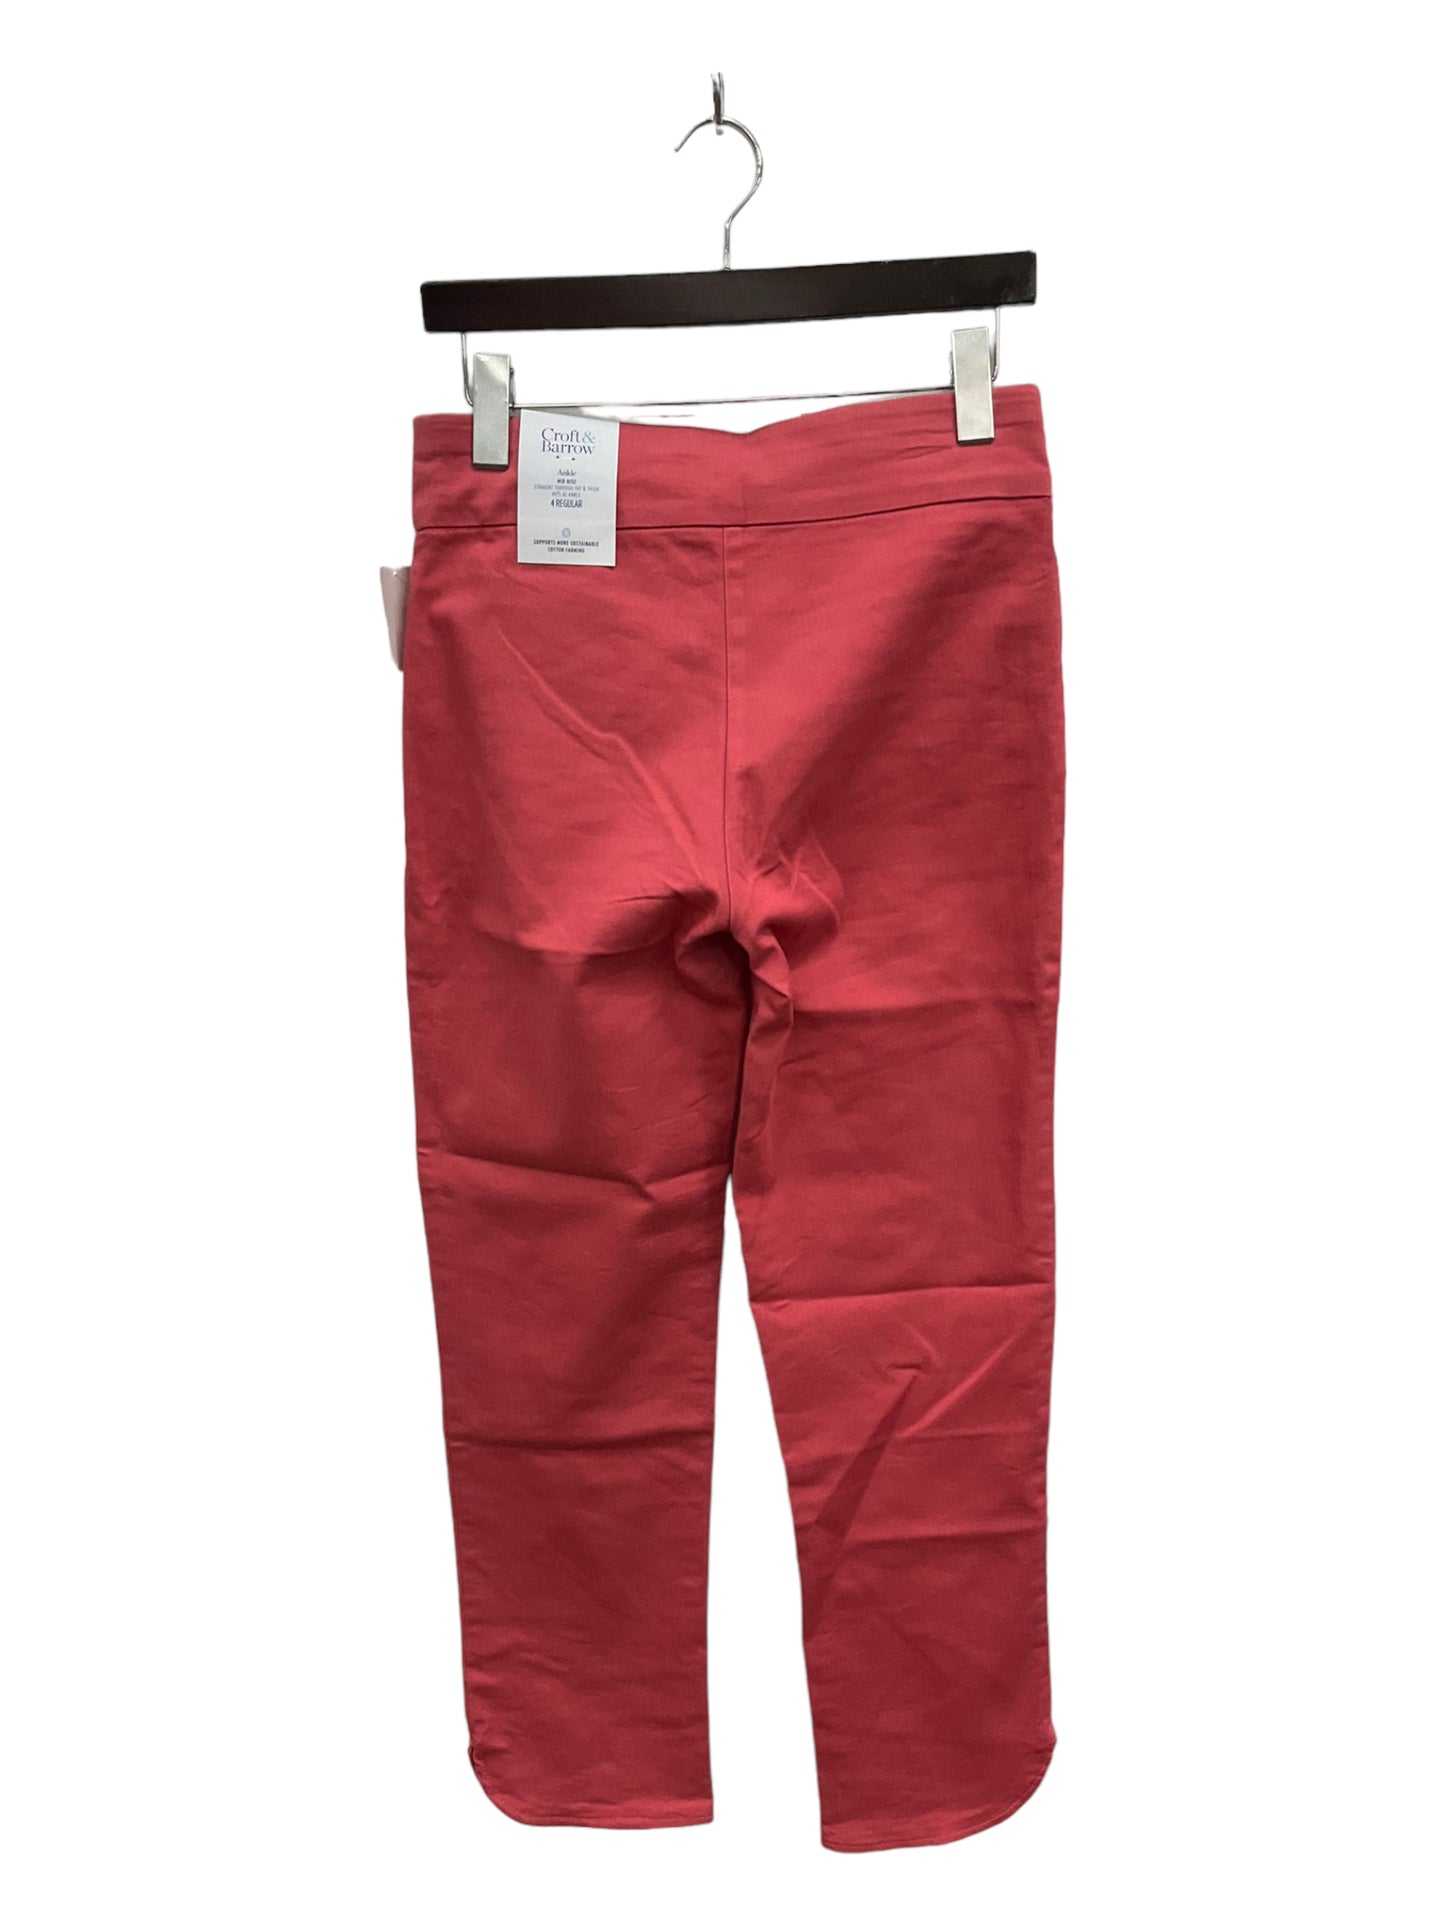 Pants Ankle By Croft And Barrow  Size: 4